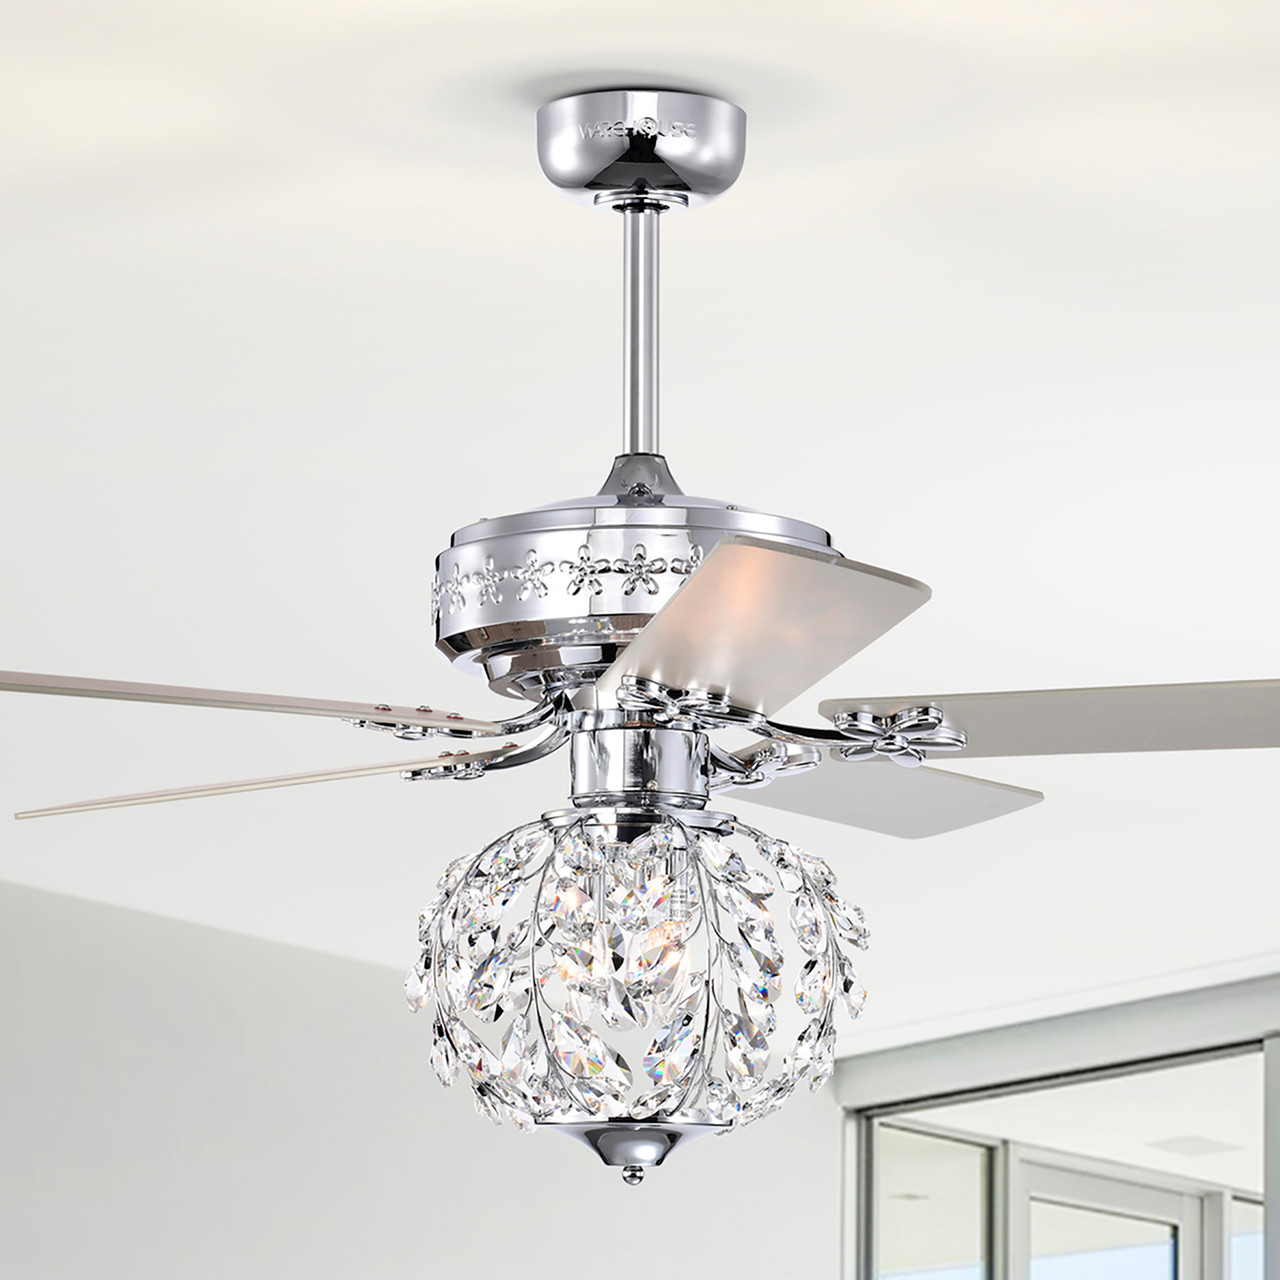 WAREHOUSE OF TIFFANY'S AY06Y06CR Wellas 52 in. 3-Light Indoor Polished Chrome Finish Ceiling Fan with Light Kit